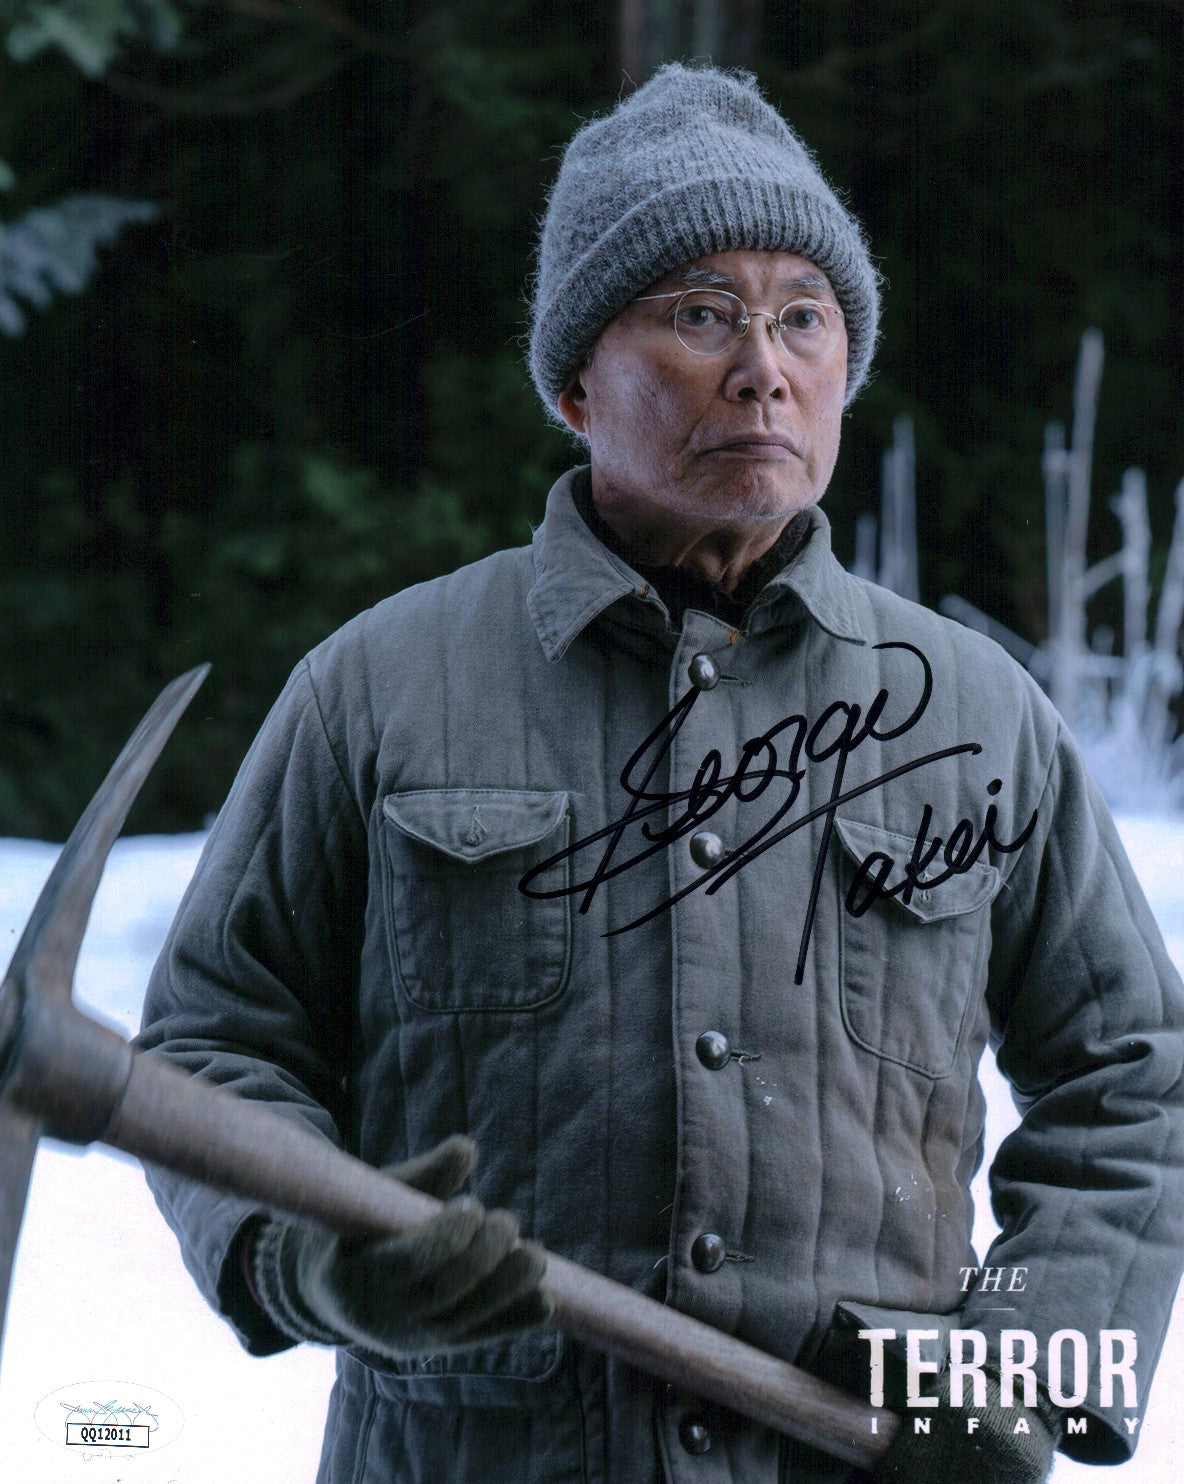 George Takei The Terror Infamy 8x10 Signed Photo JSA Certified Autograph